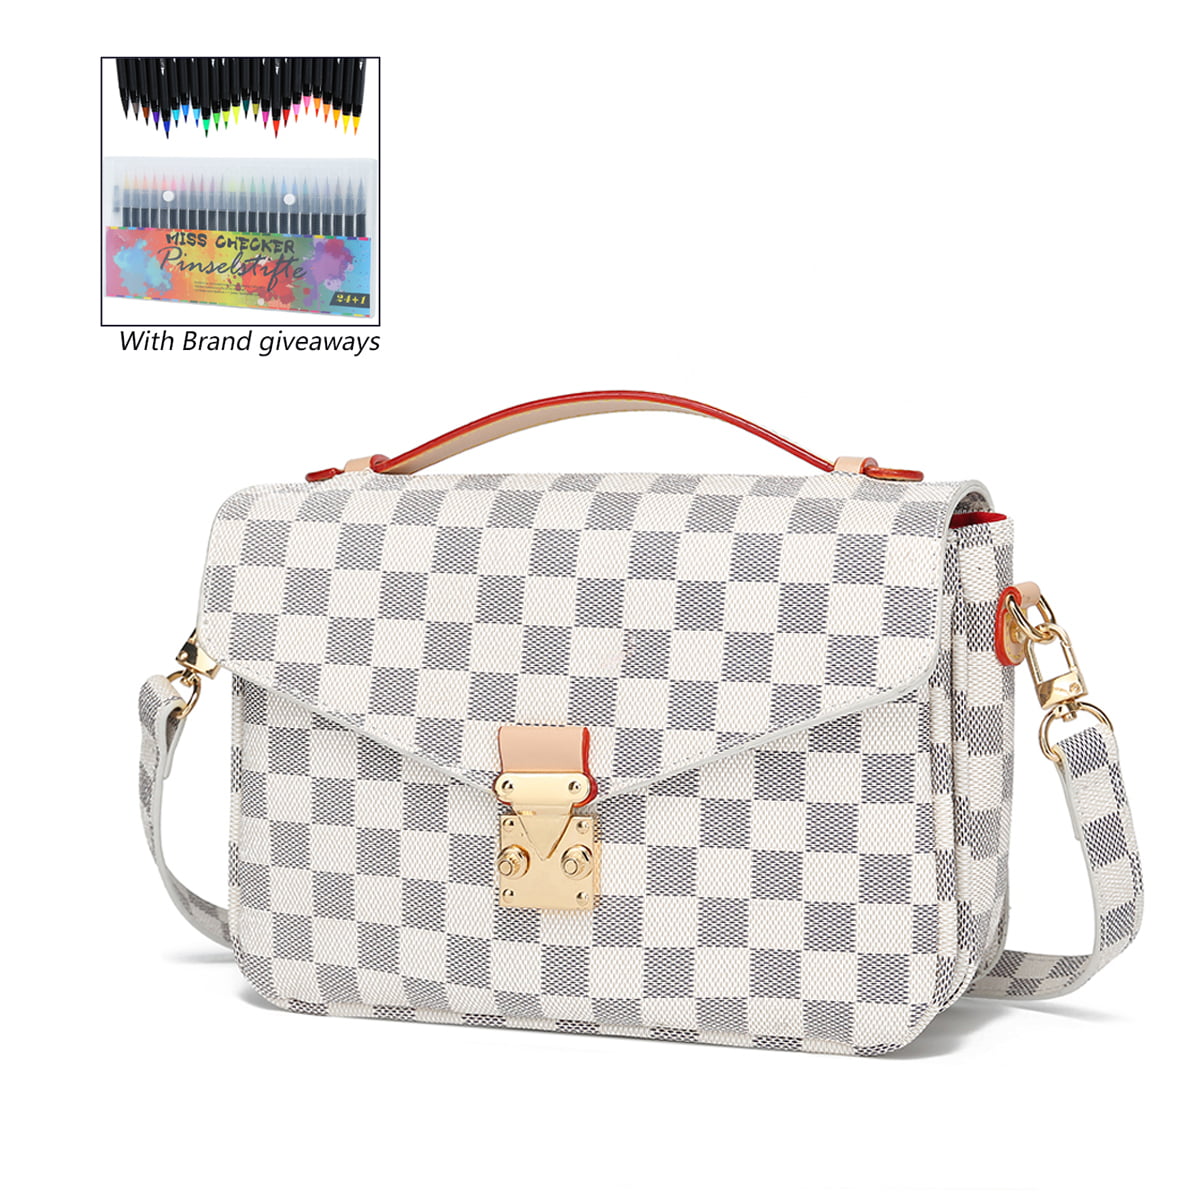 Womens Checkered Tote Shoulder Bag with inner pouch - PU Vegan Leather  Shoulder Satchel Fashion Bags -Cream checkered 